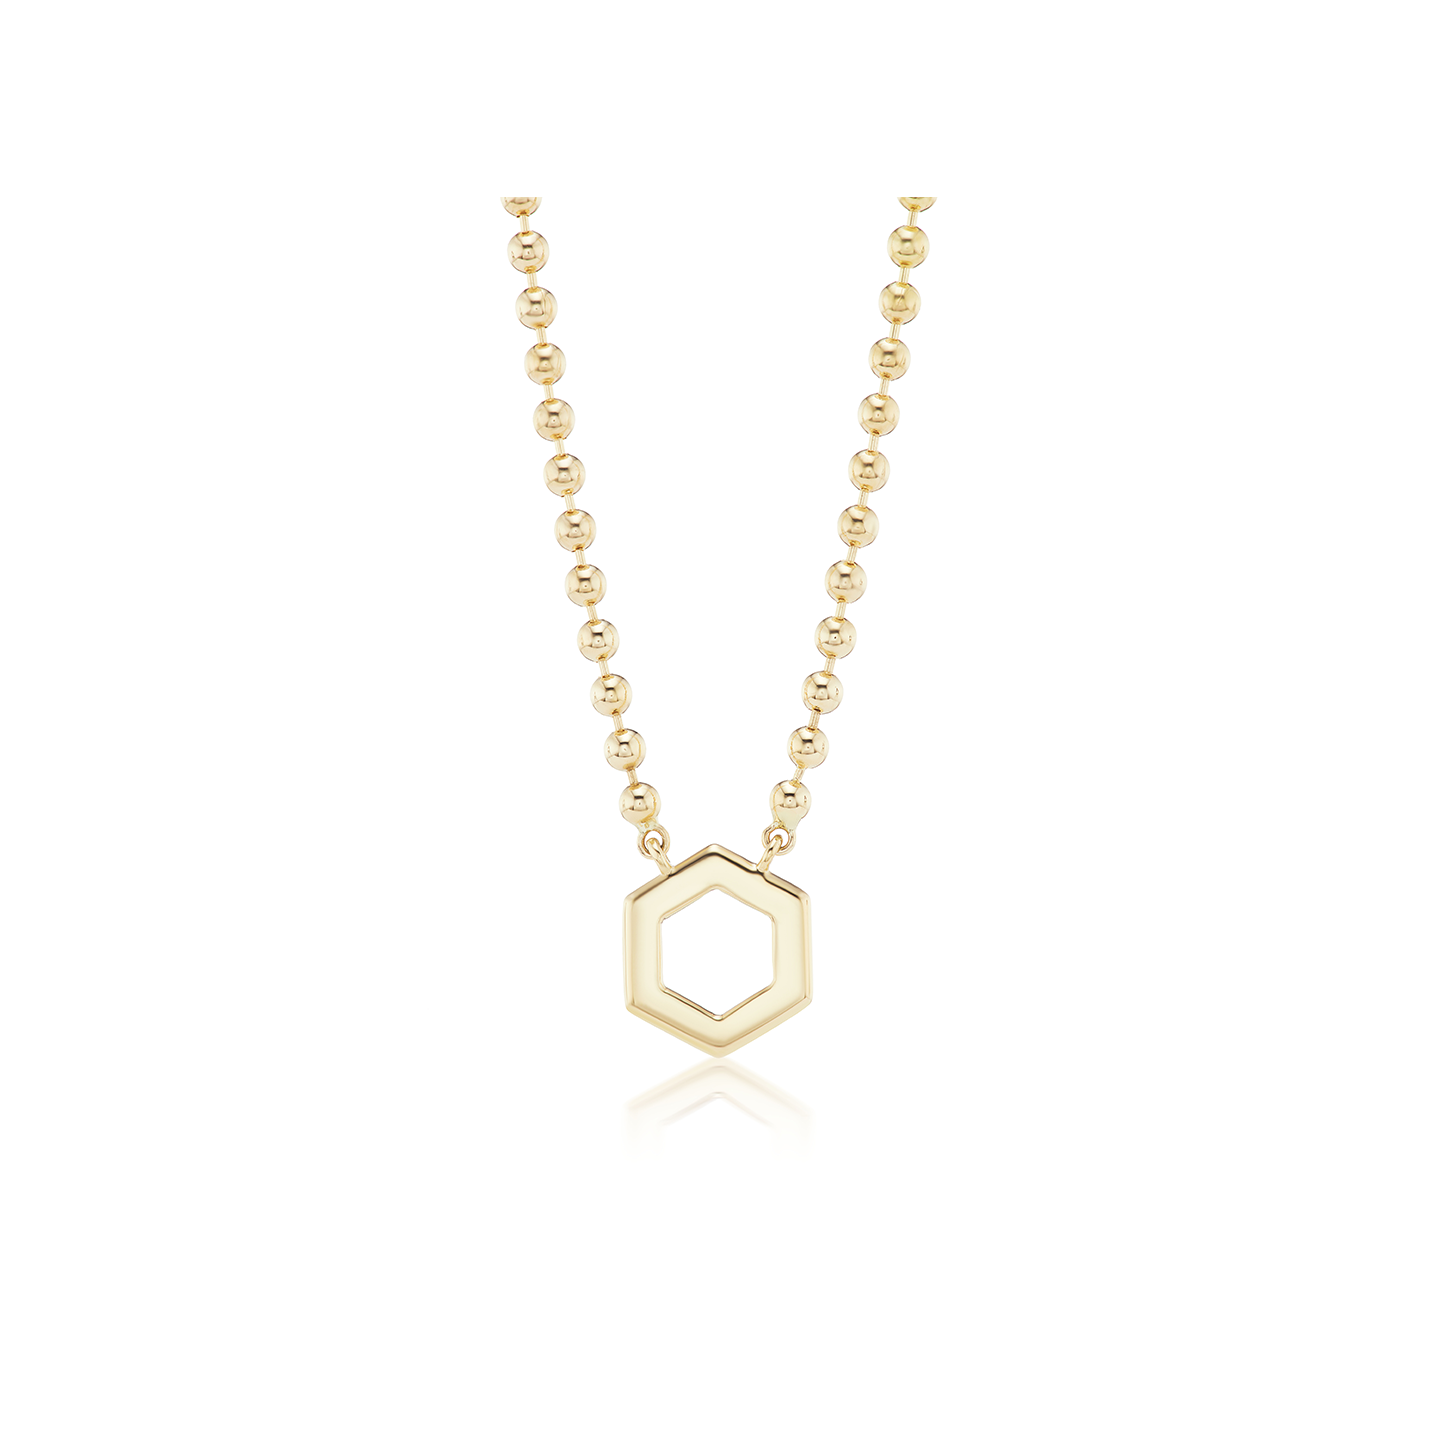 Harwell Godfrey Foundation 3mm Ball Chain Necklace with Gold Hexagon